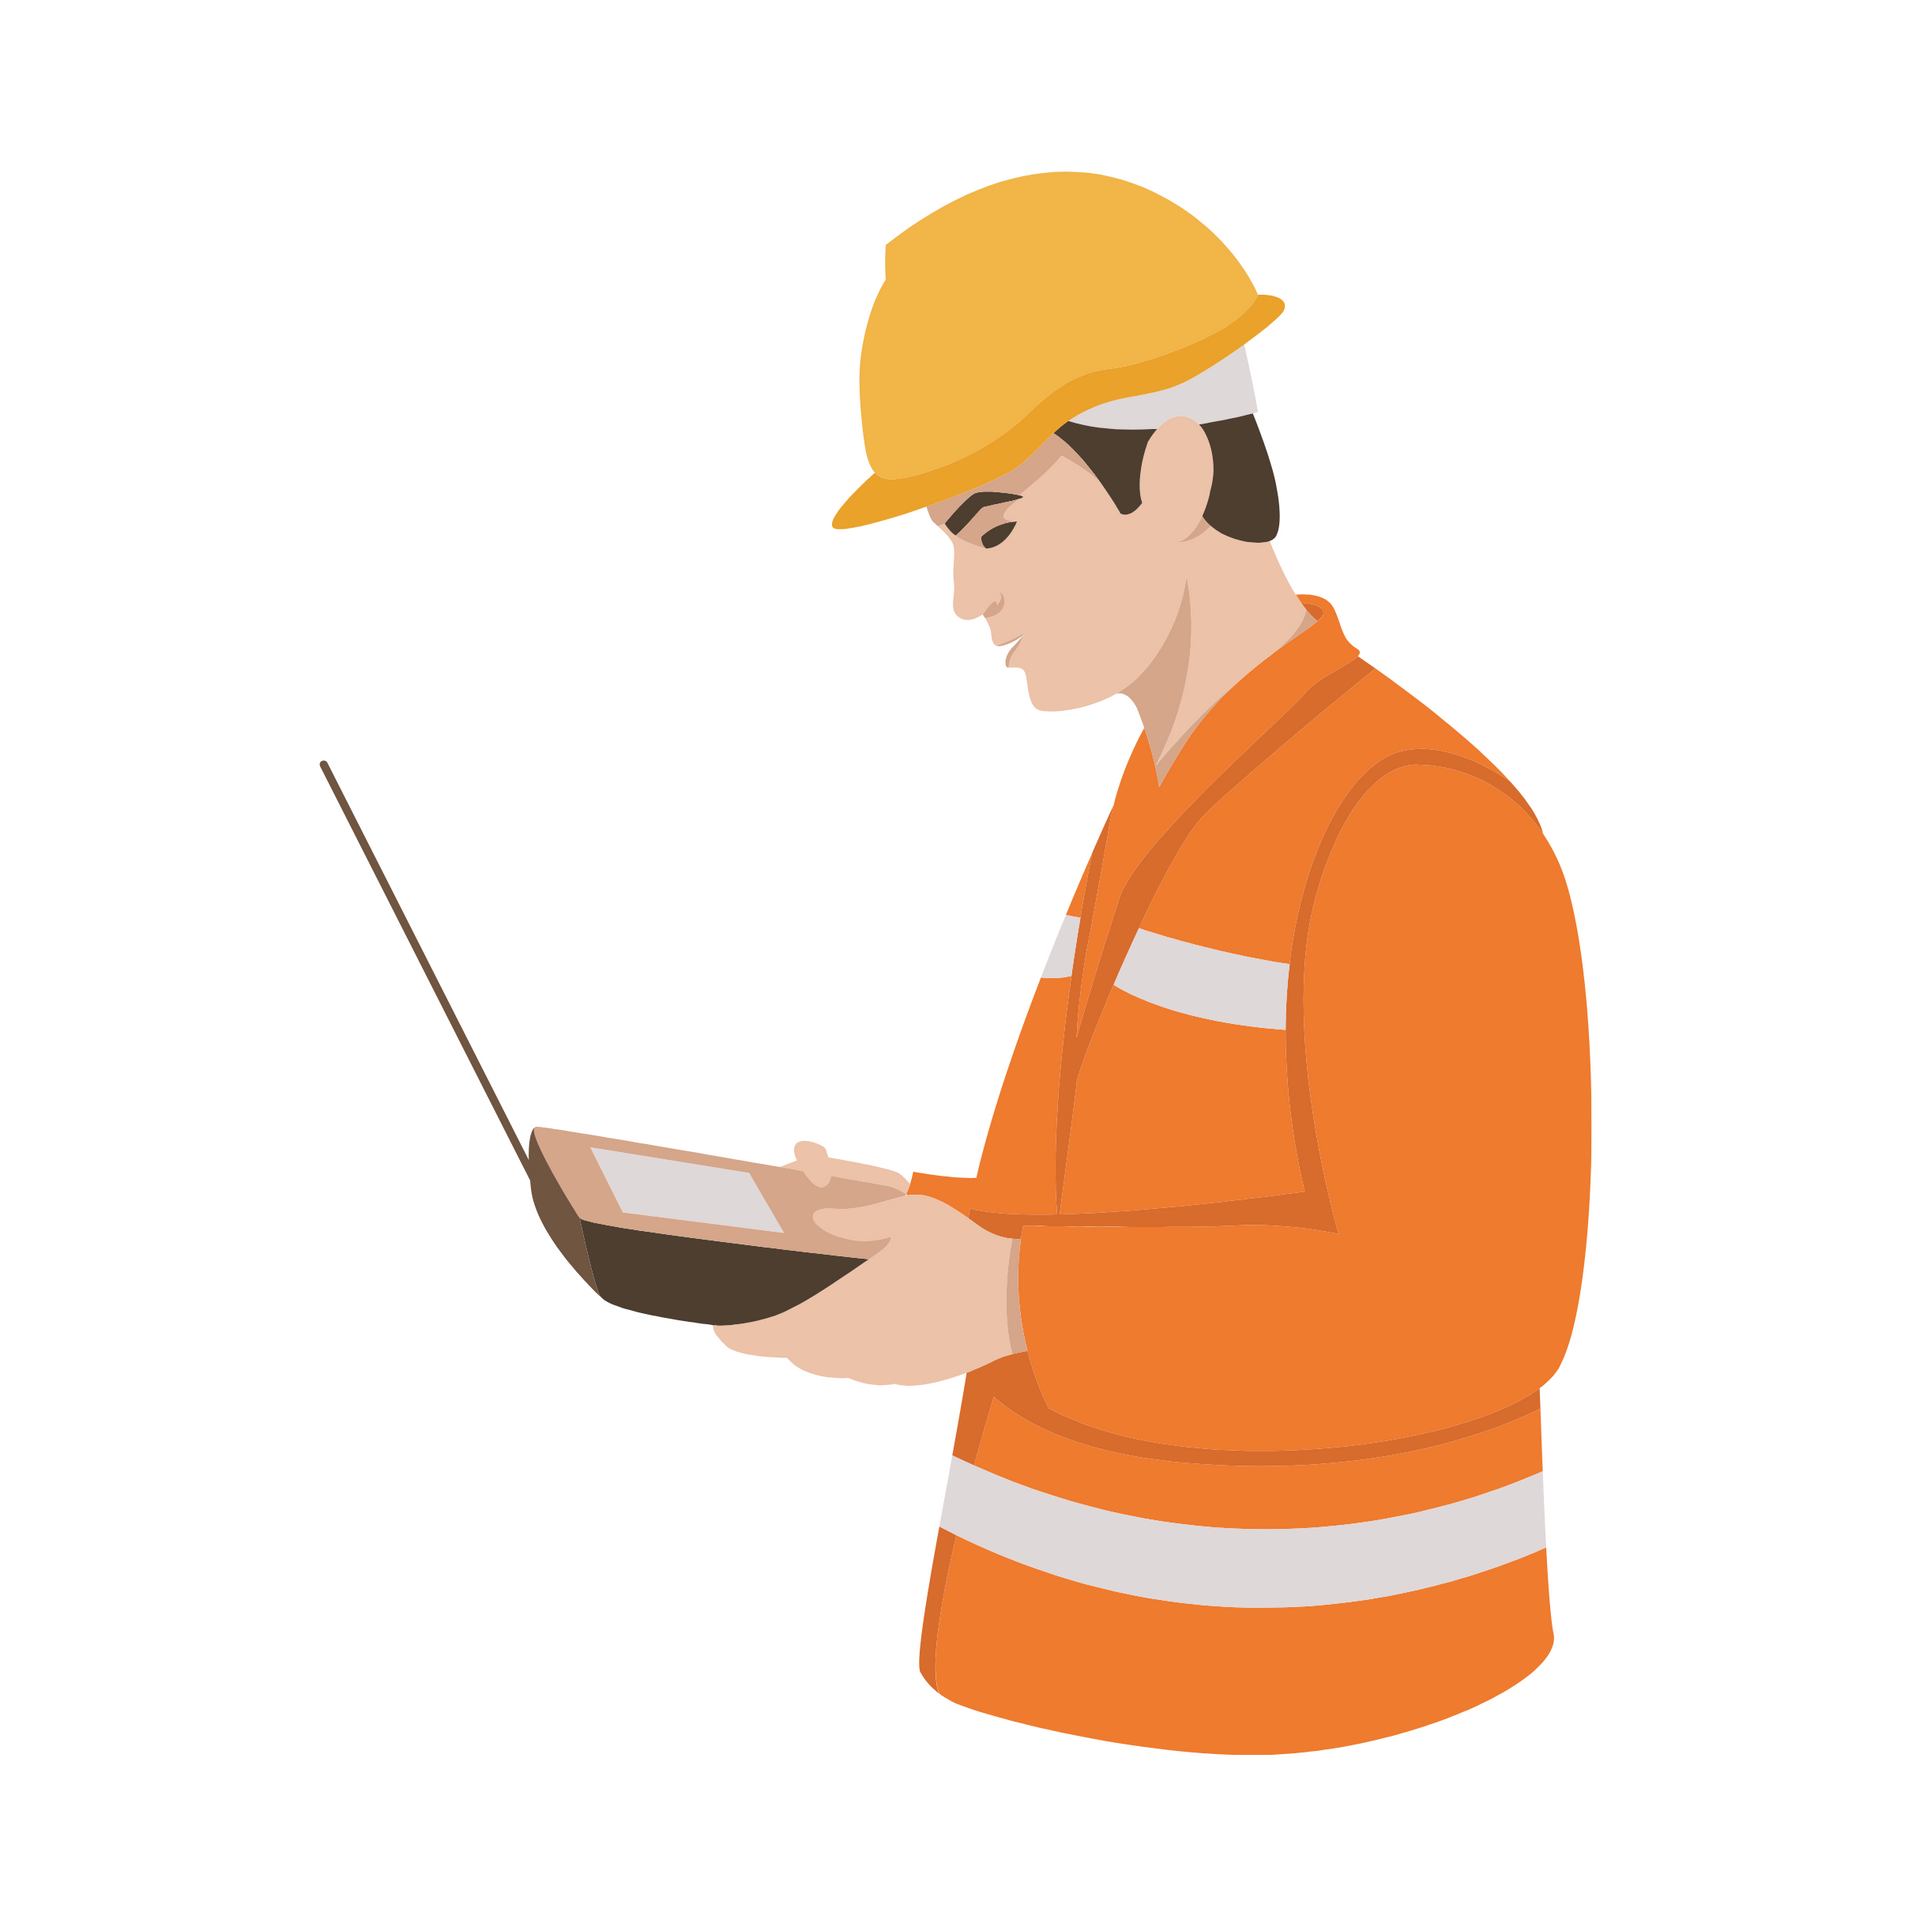 A construction worker is using a laptop computer while wearing a hard hat.